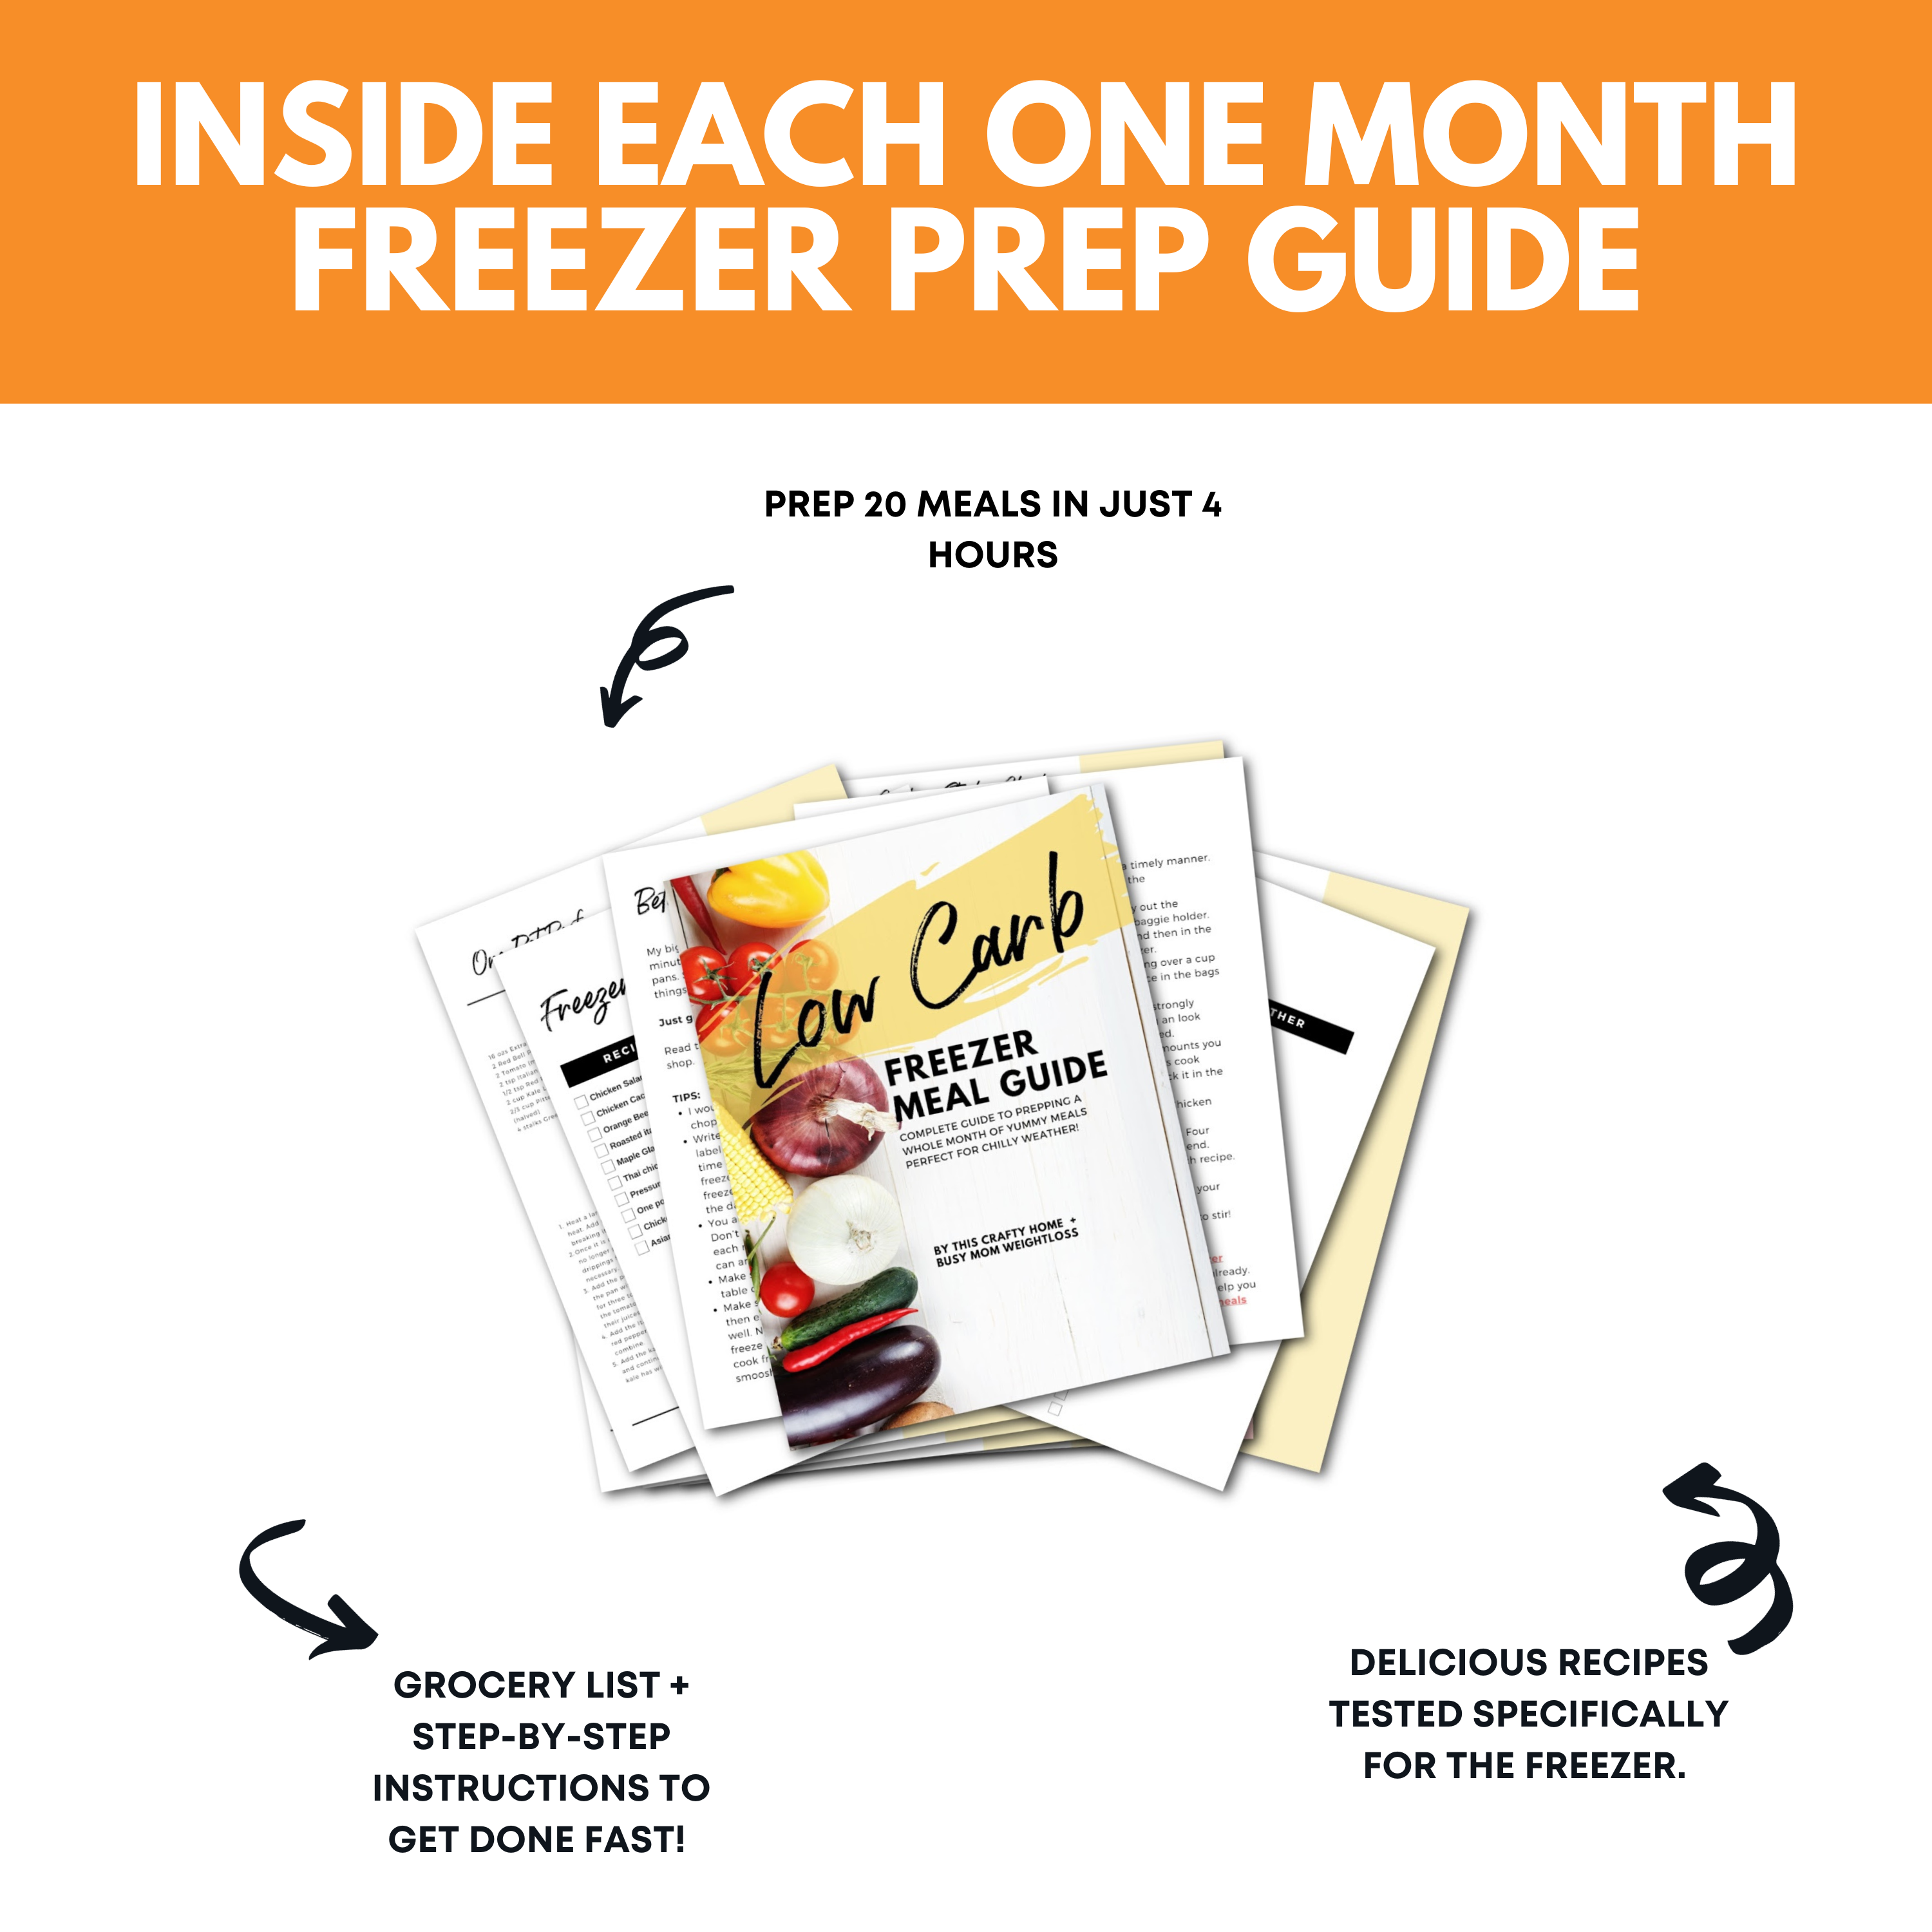 Low-Carb Freezer Meal Guide